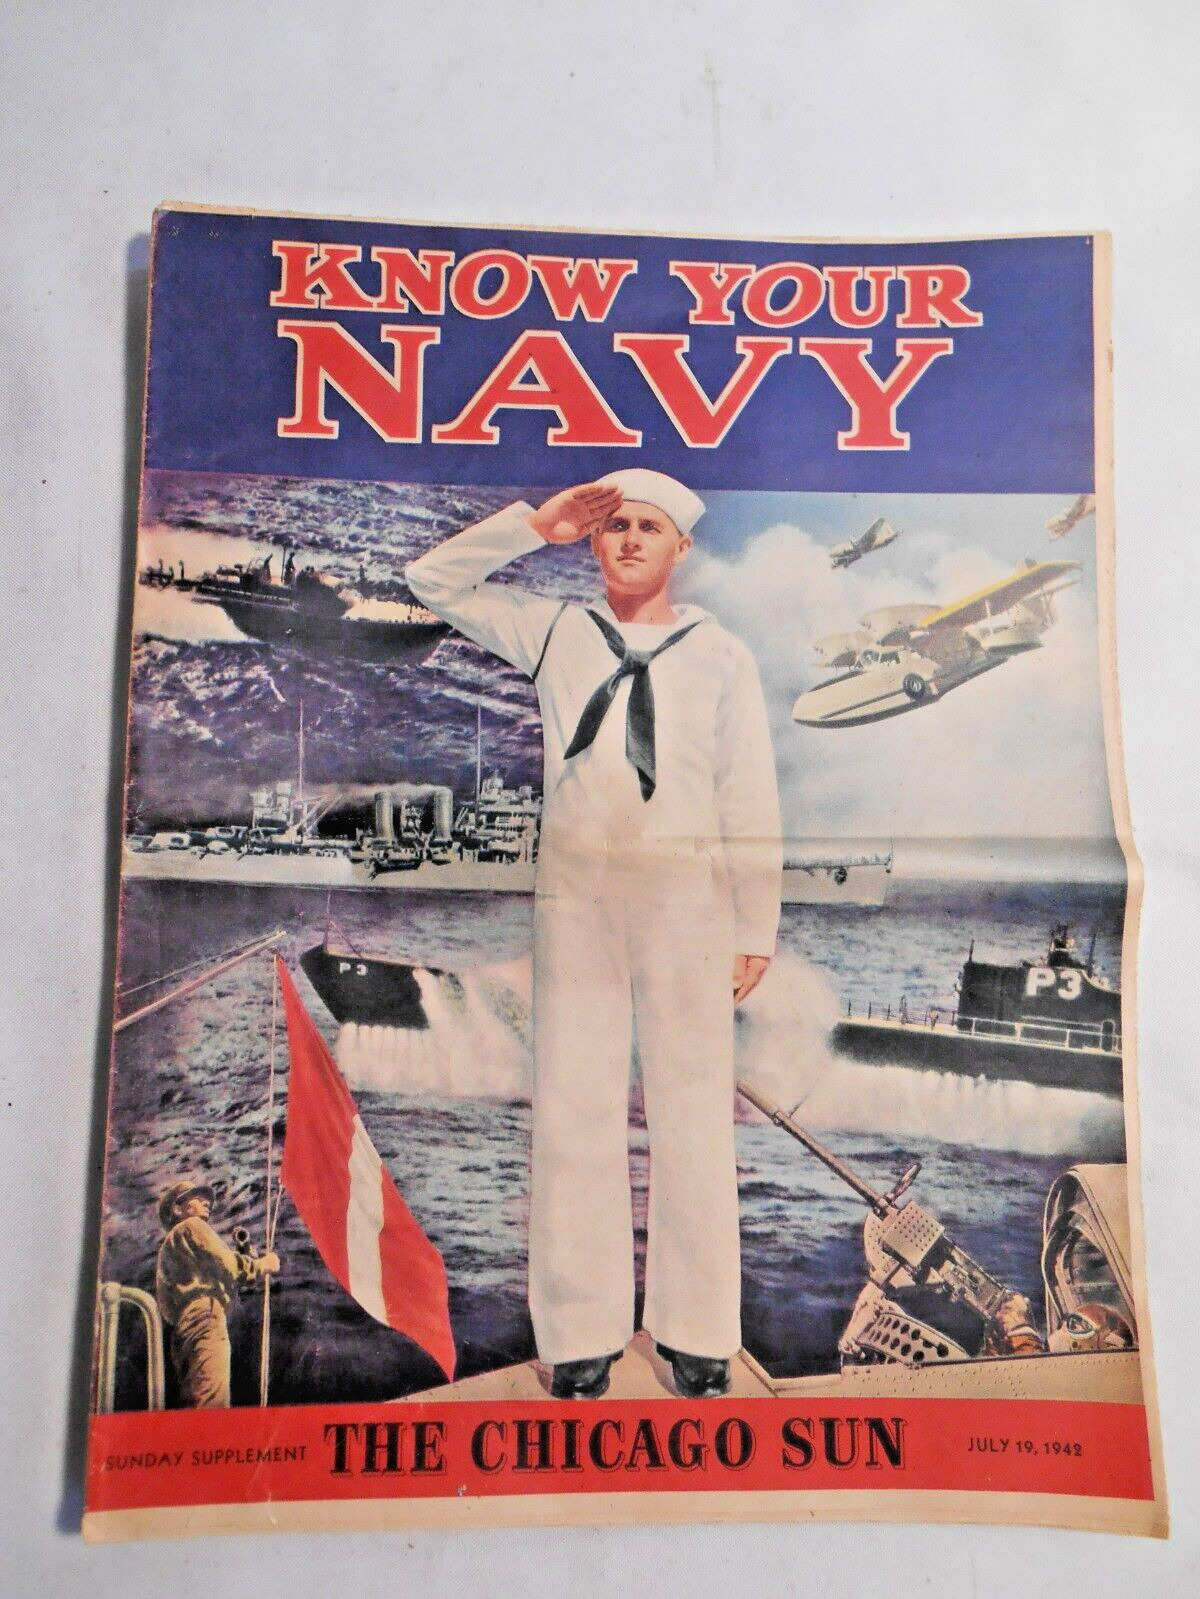 July 19, 1942 The Chicago Sun Sunday Supplement KNOW YOUR NAVY